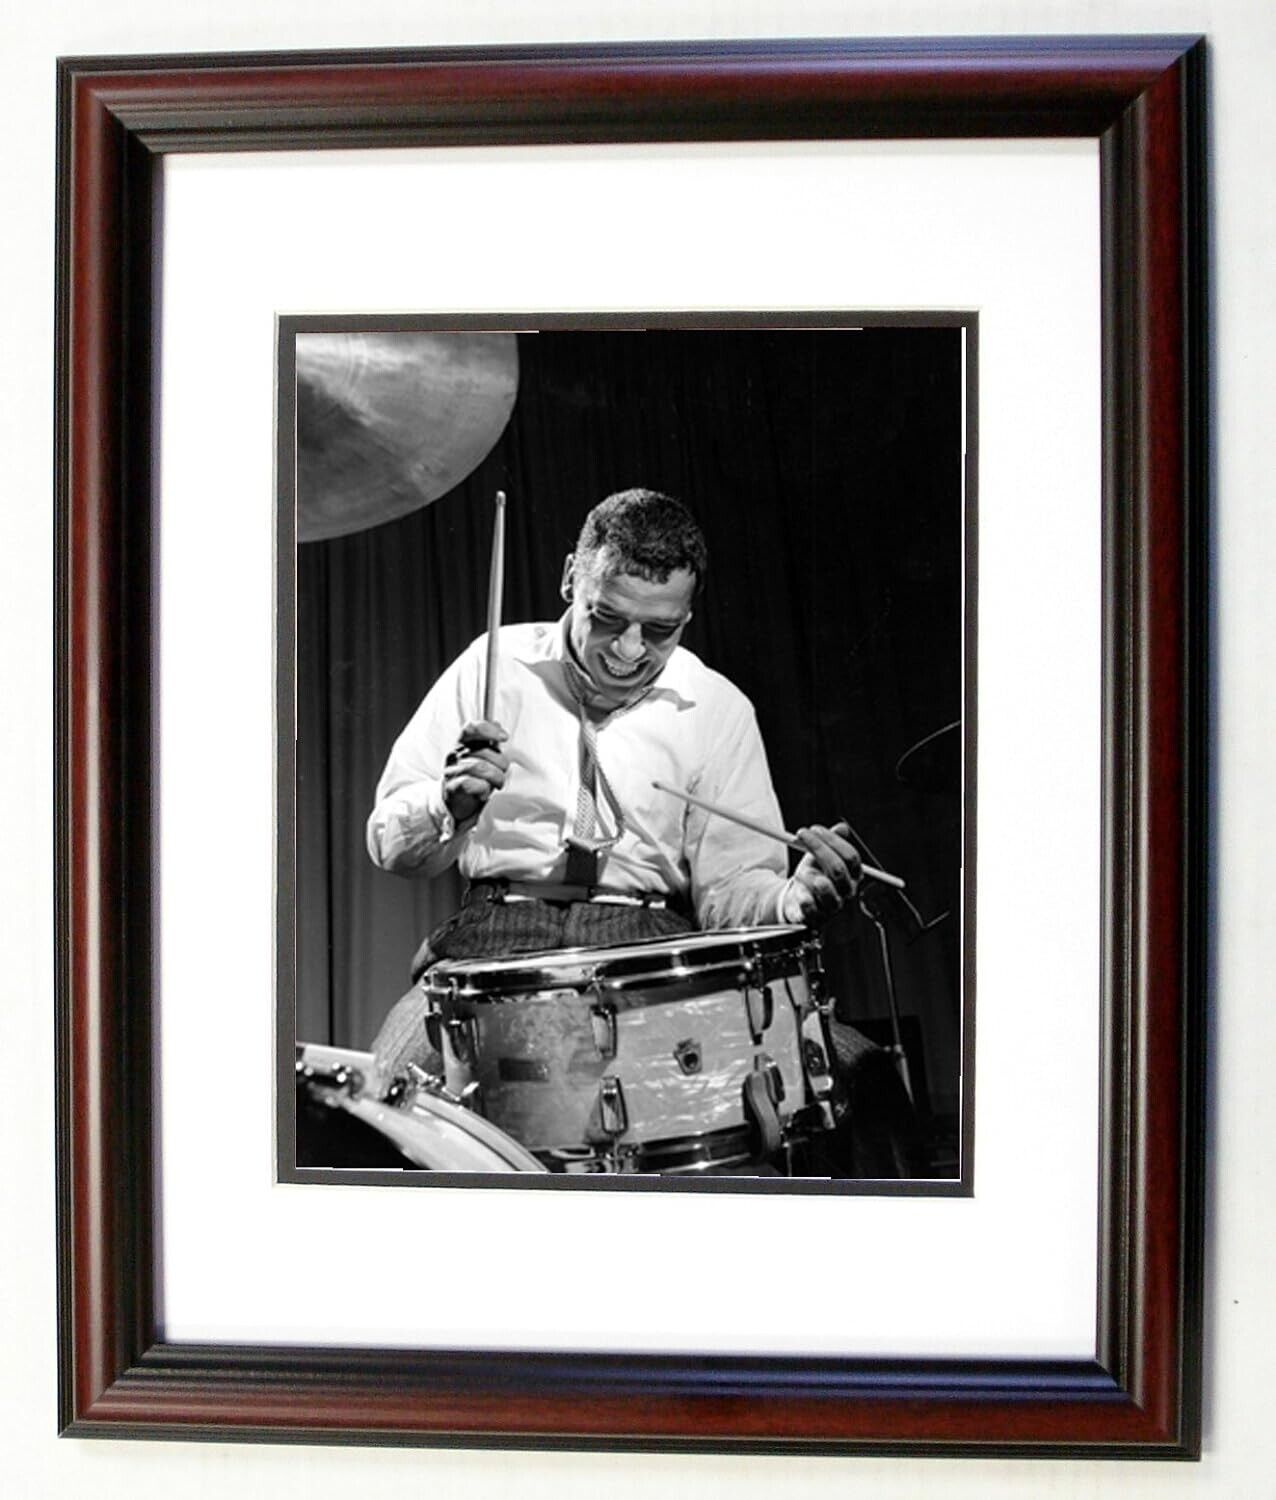 Buddy Rich 8x10 Photo in 11x14 Matted Cherry Frame #11